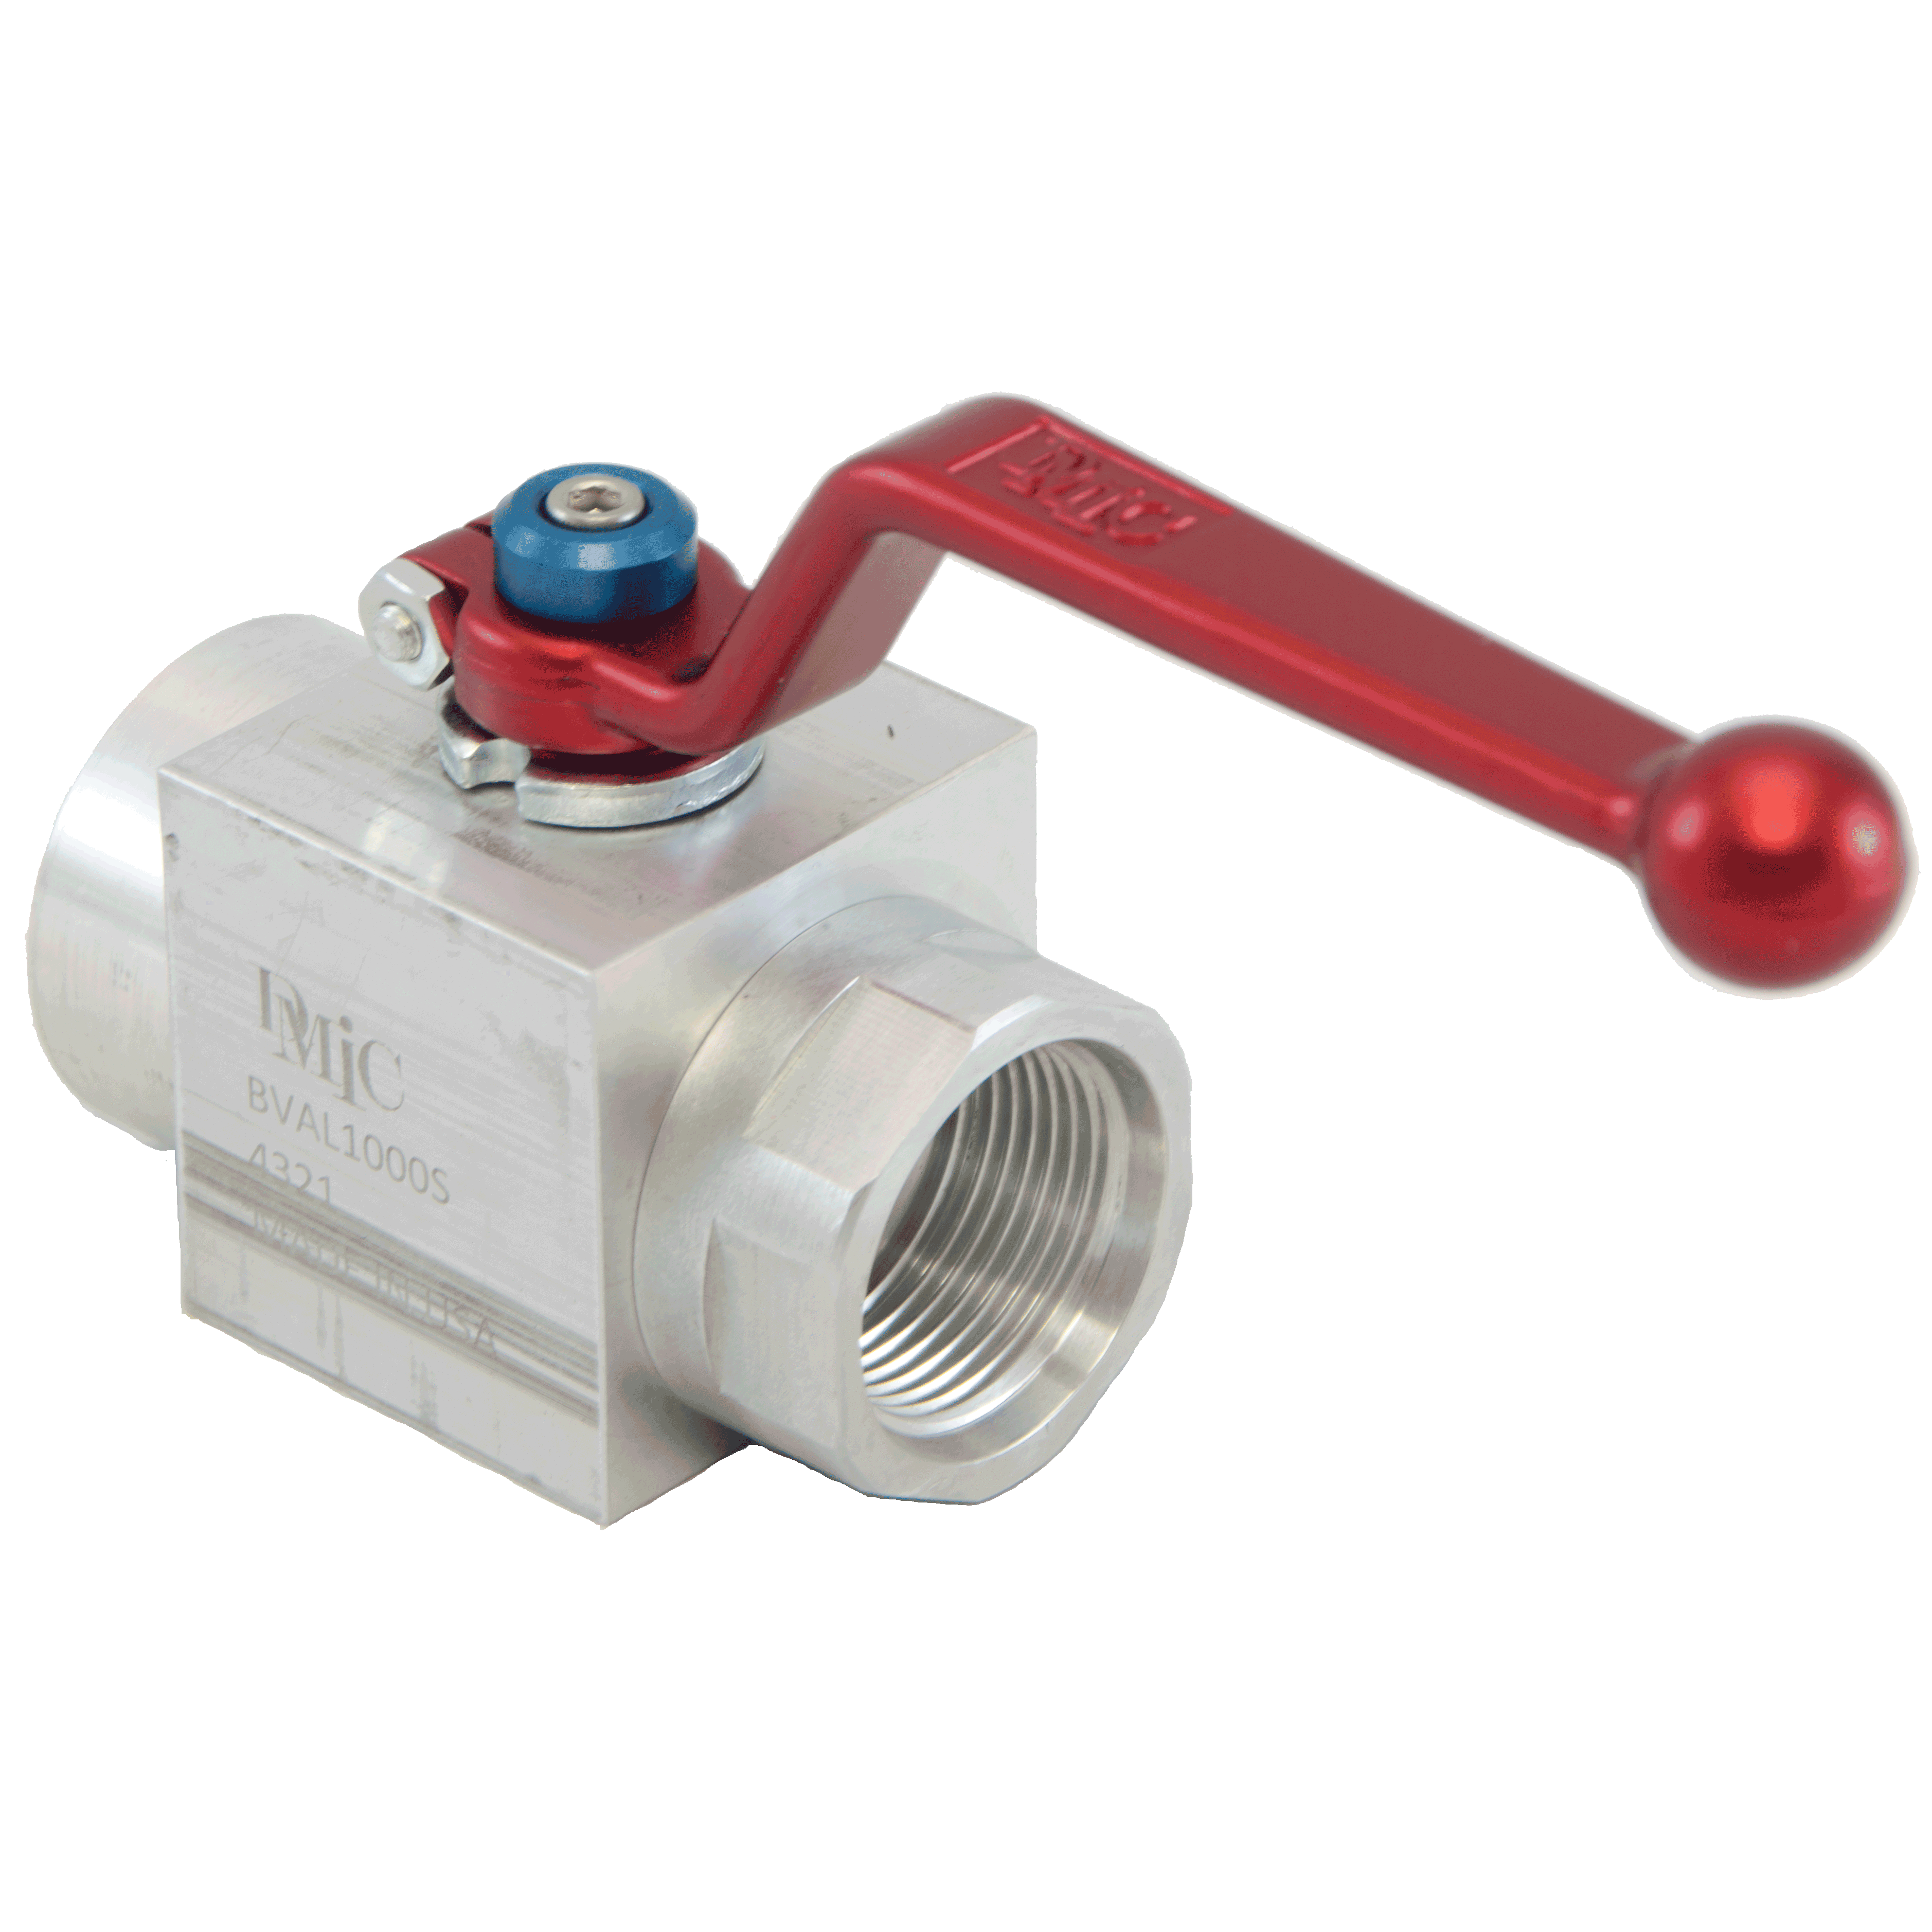 BVAL-1250N-4321 : DMIC Suction Ball Valve, 1.25 NPT, Aluminum, 600psi, Two-Way